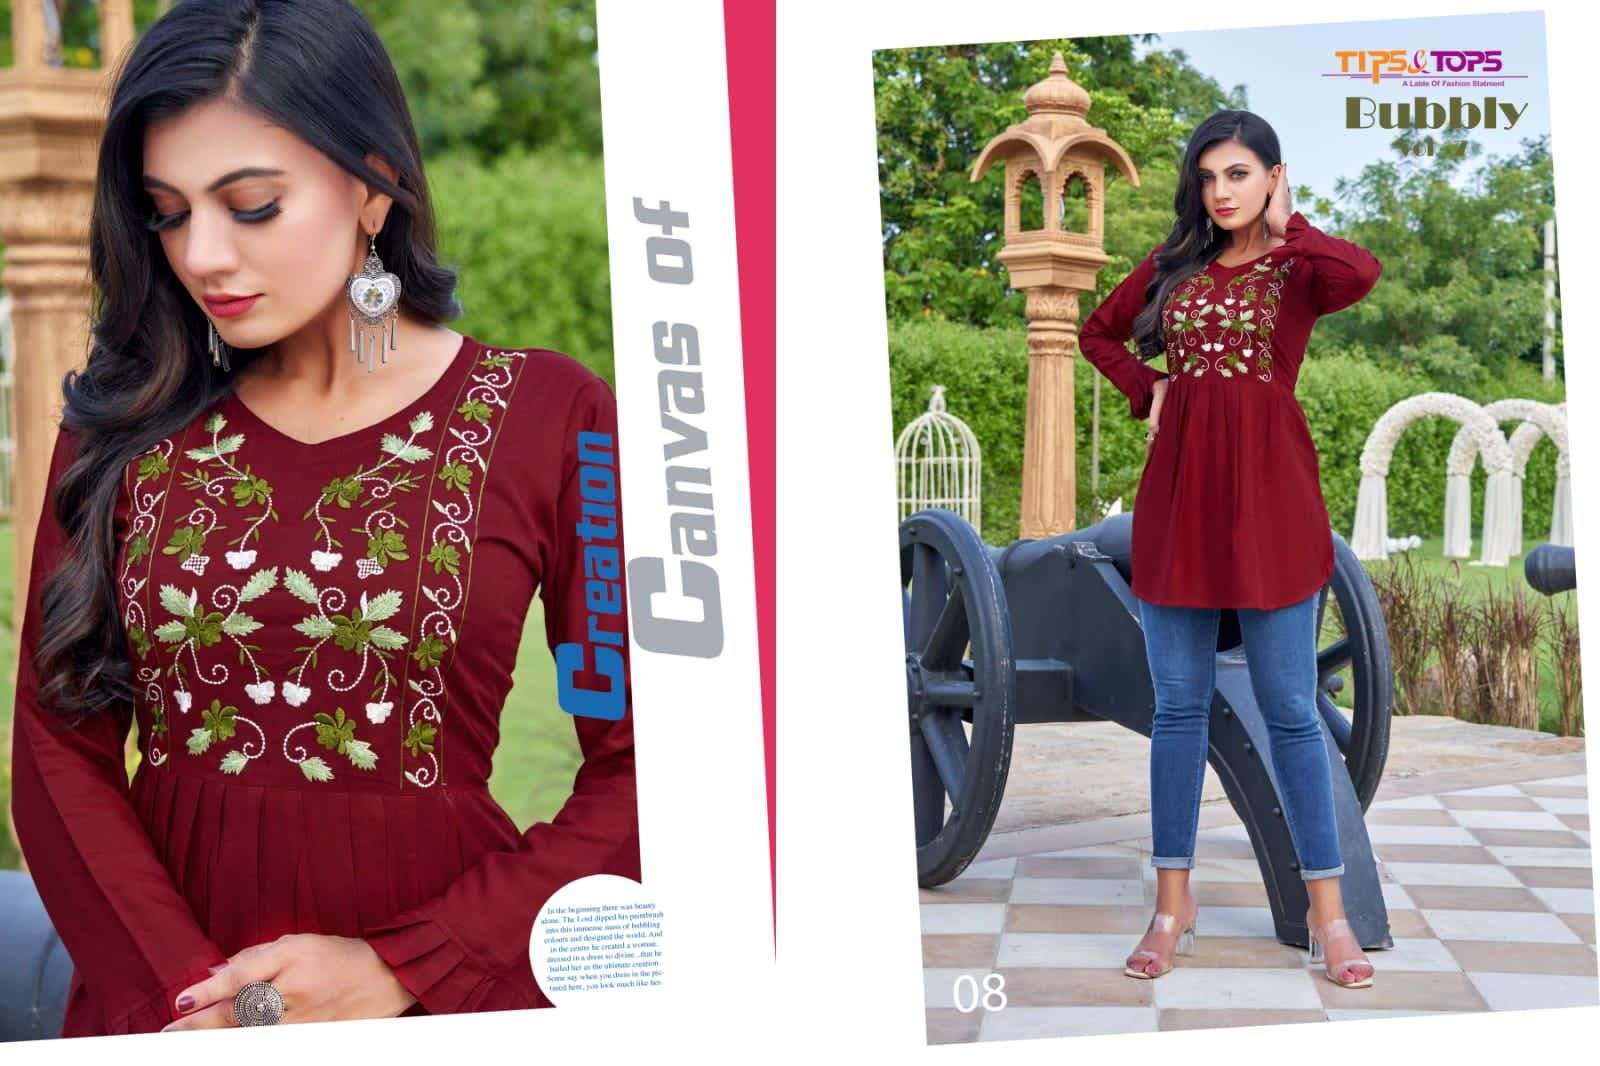 Tips & Tops Bubbly Vol 7 Catalog Rayon Slub Fancy Embroidered Tops